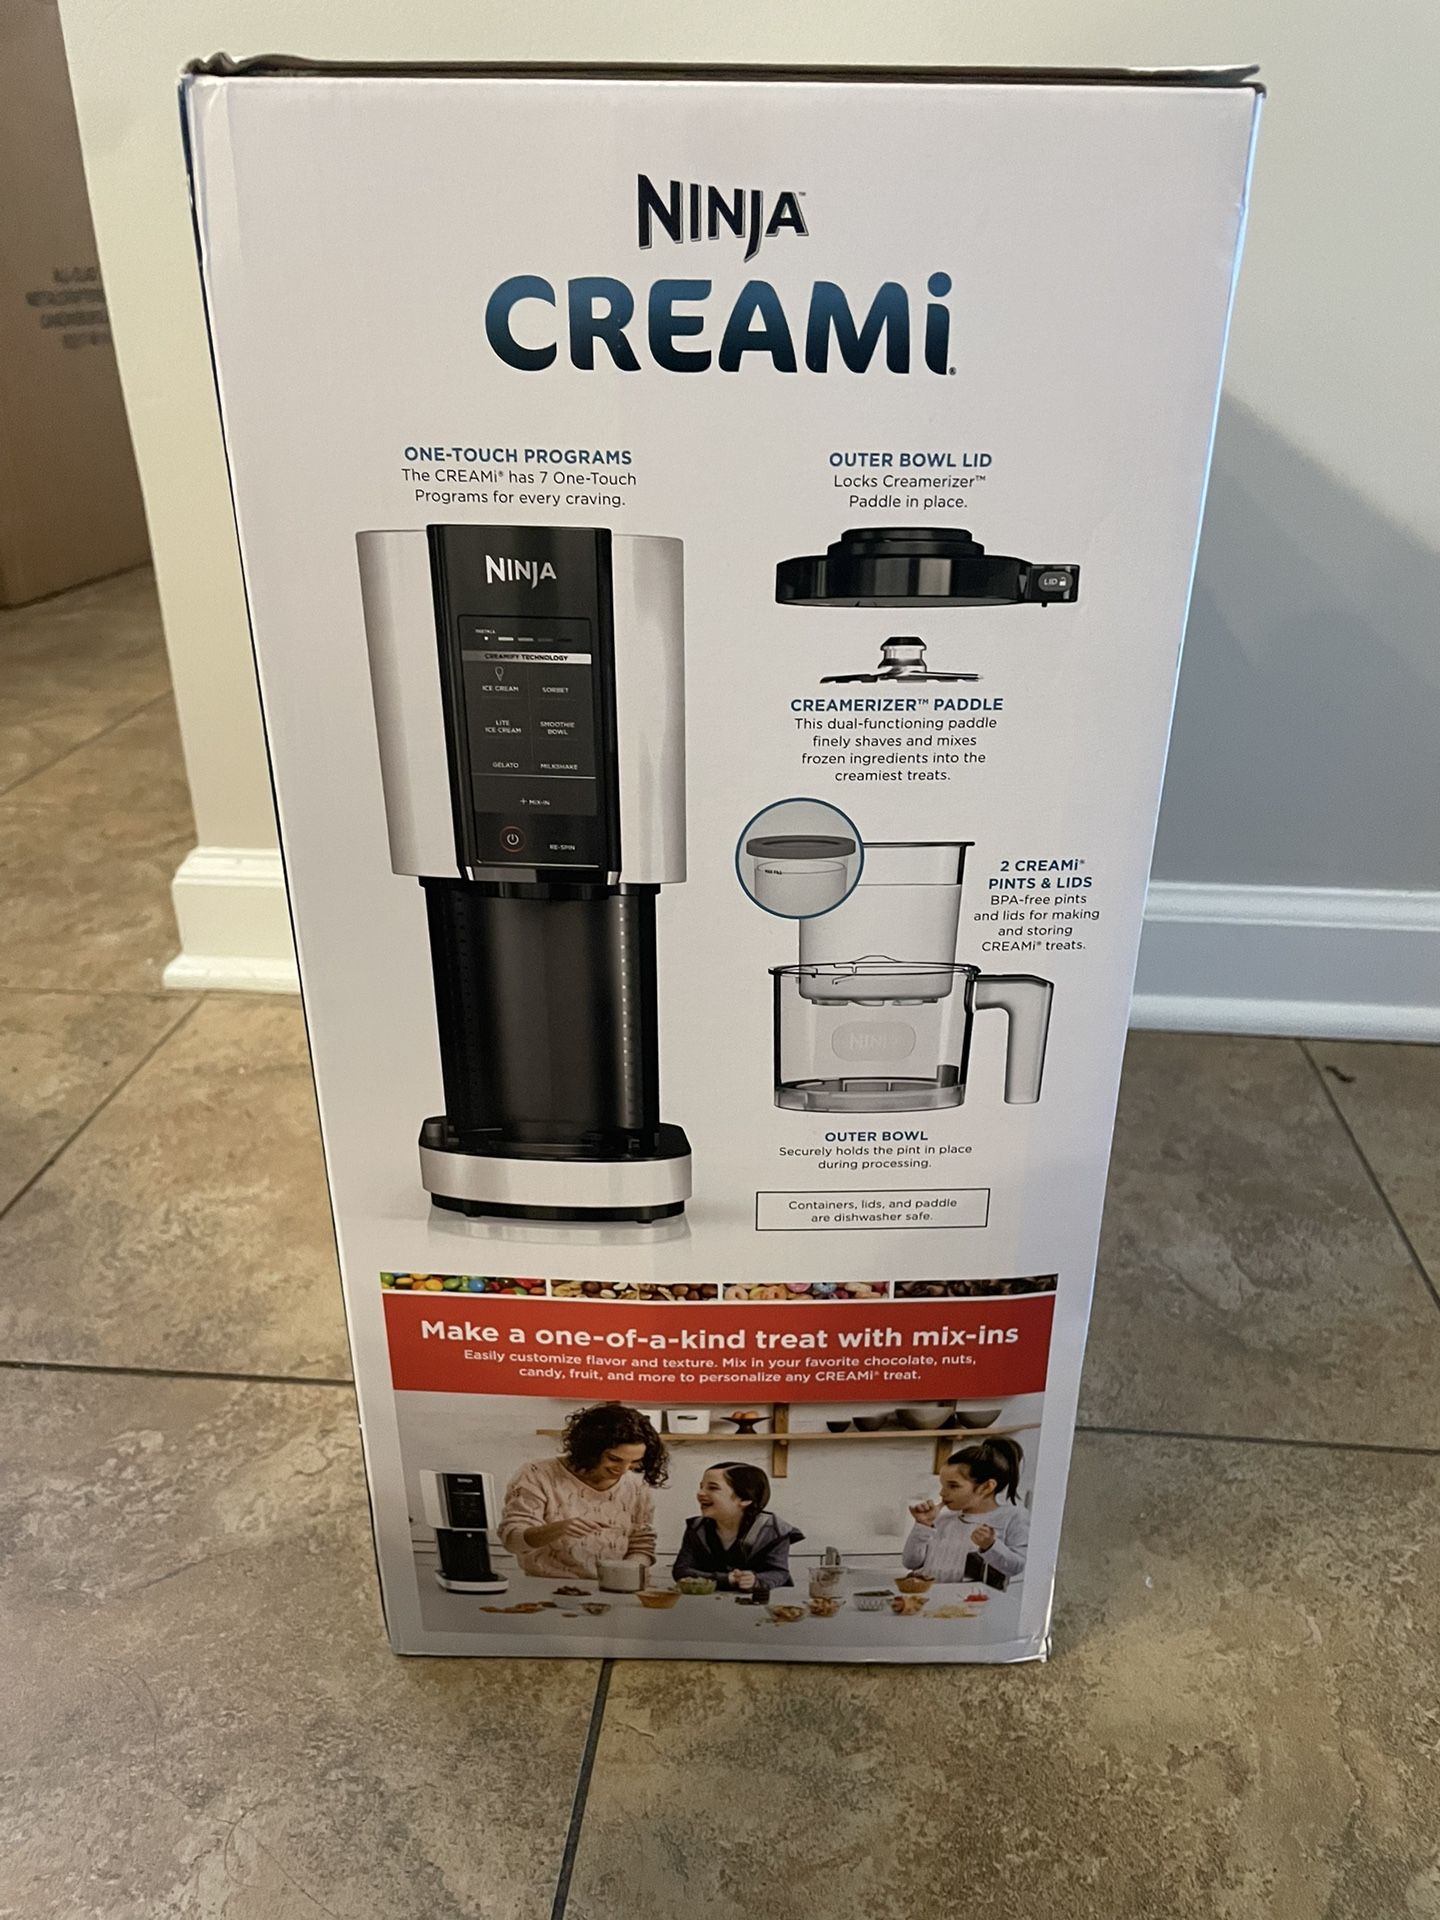 Ninja CREAMi, Ice Cream Maker and Frozen Treat Maker with 7 One-Touch Programs, White, NC300WMWH